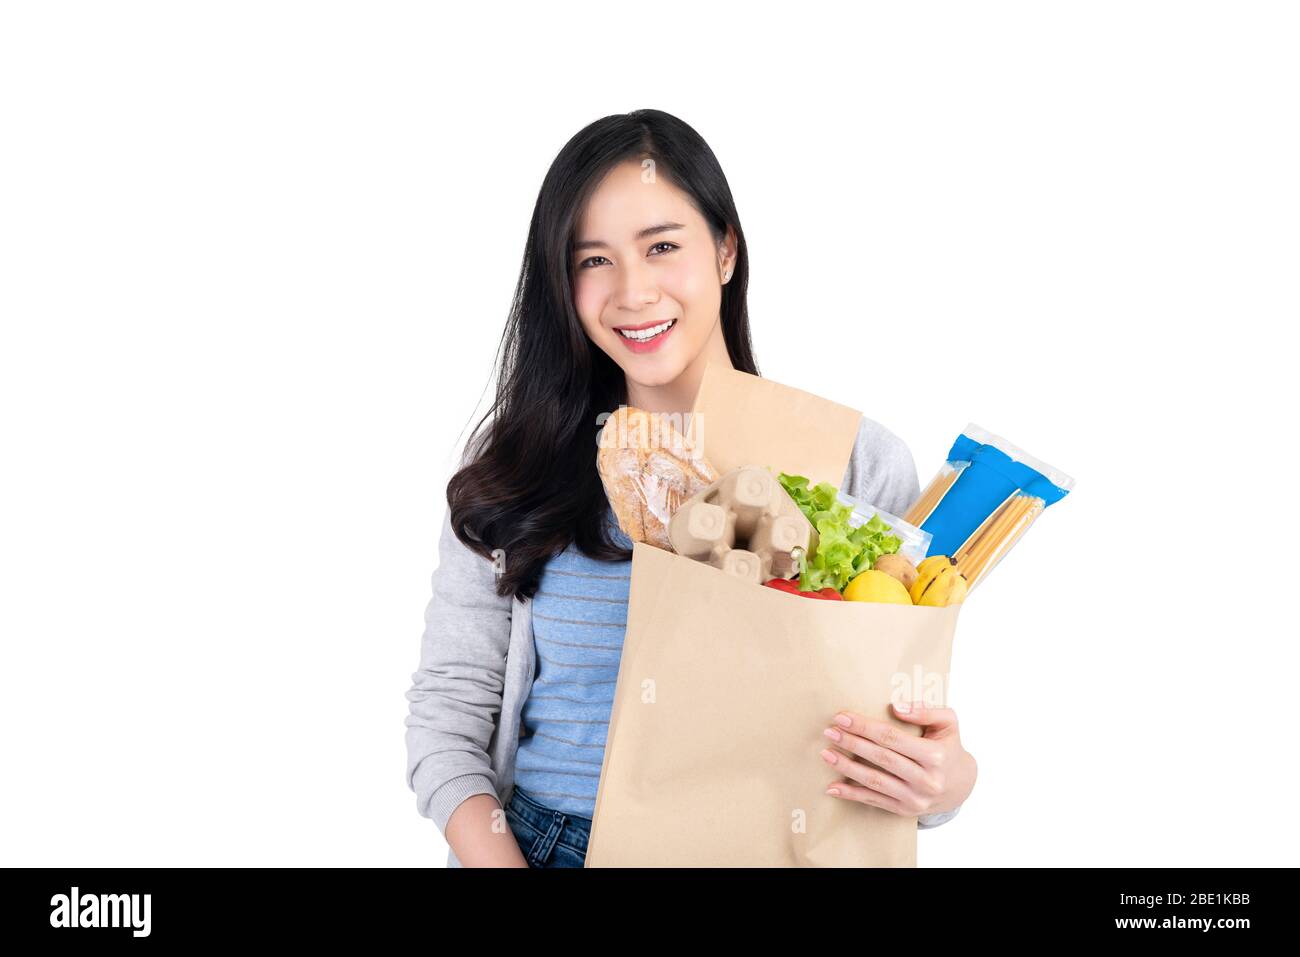 Beautiful smiling Asian woman holding paper shopping bag full of food and groceries isolated on white background Stock Photo